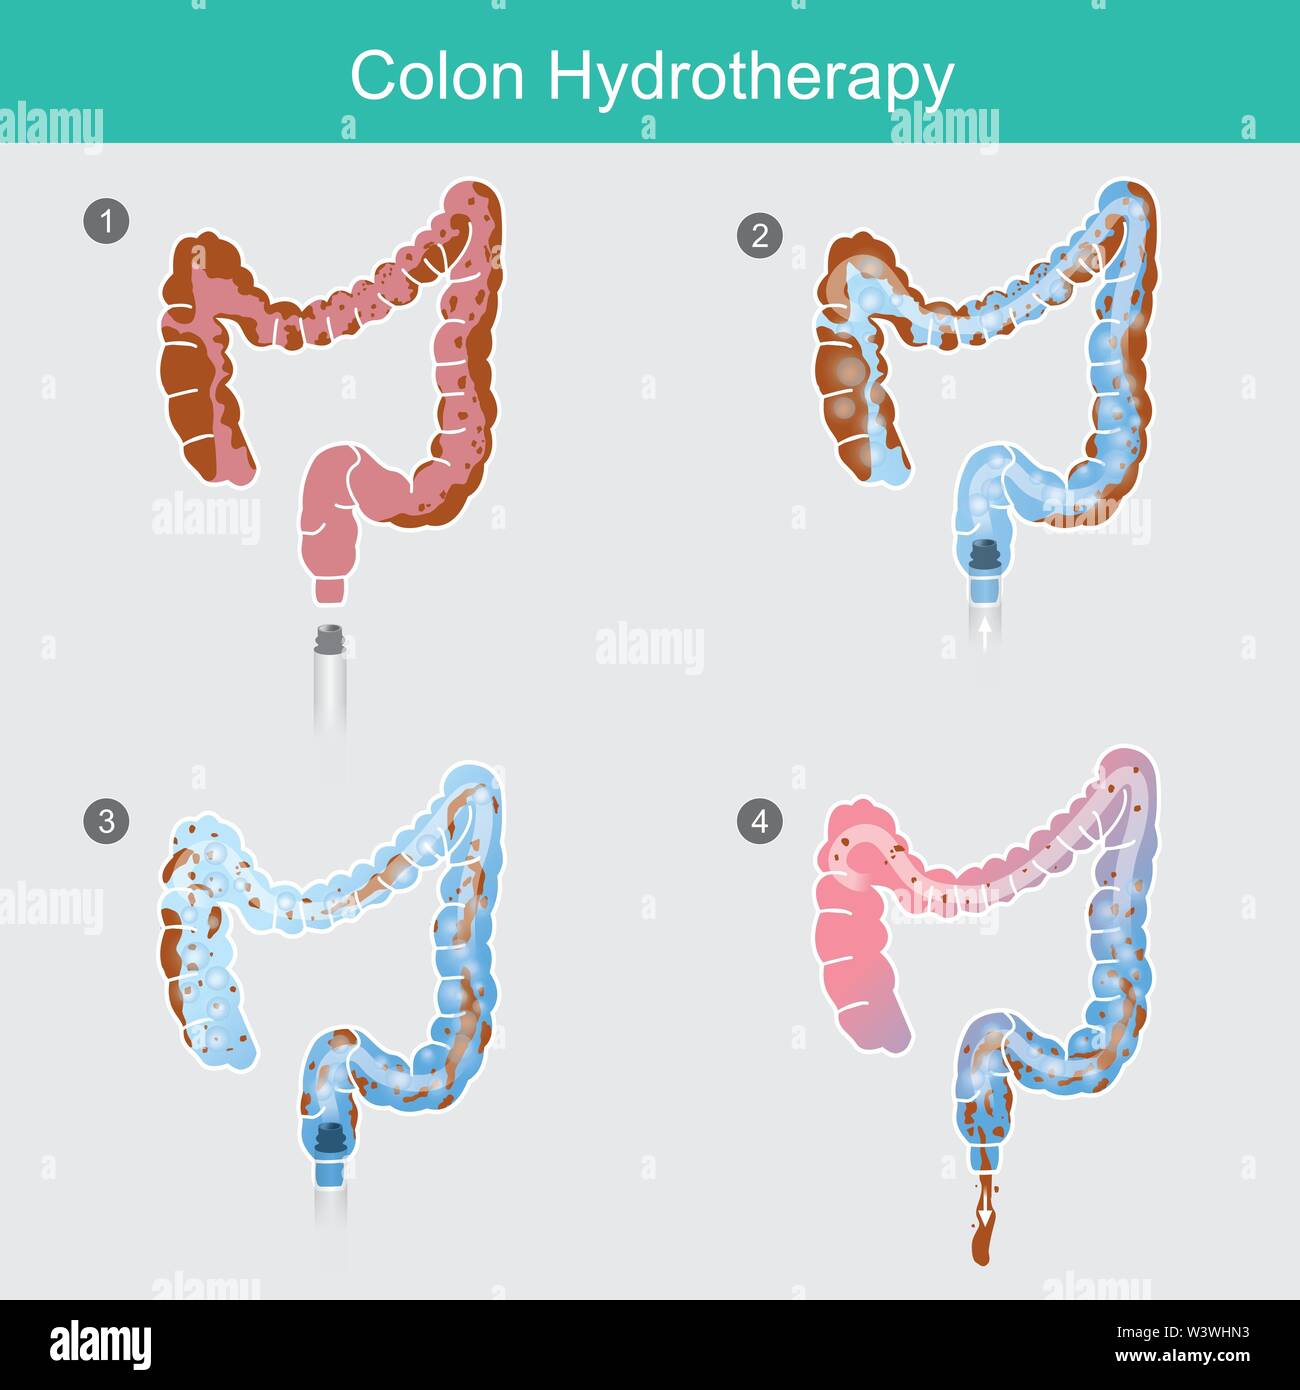 Colon Hydrotherapy. The secreted of waste that accumulates in the colon wall for a long time, Can use the removal method by inserting water solution h Stock Vector